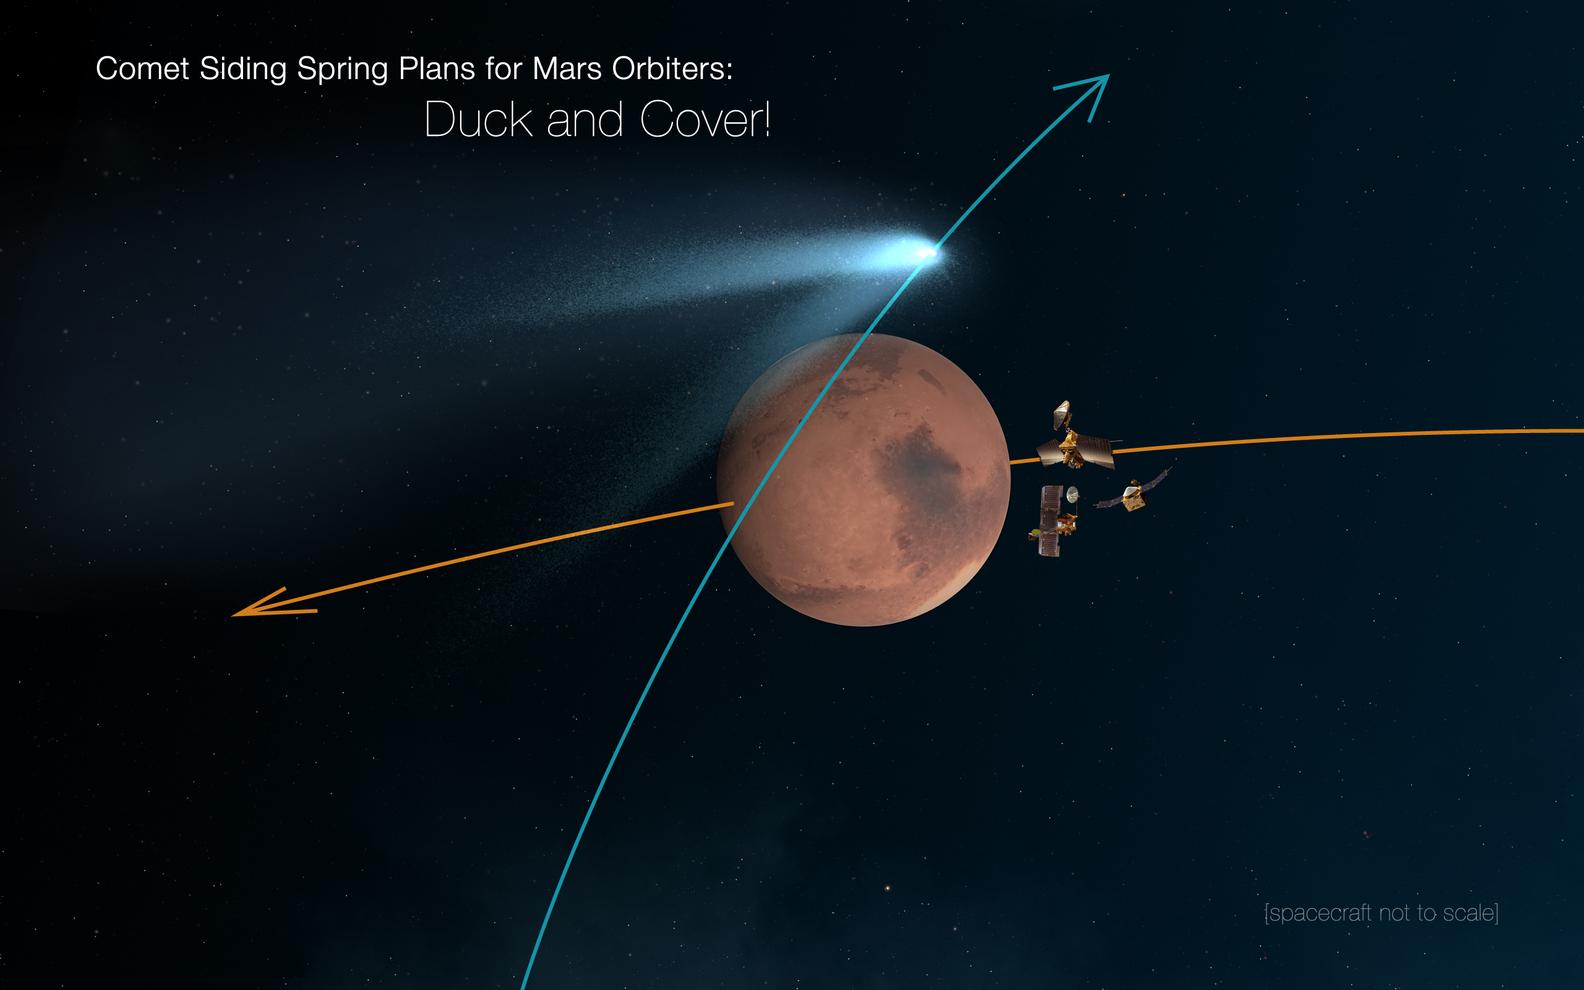 Mars Orbiters 'Duck and Cover' for Comet Siding Spring Encounter